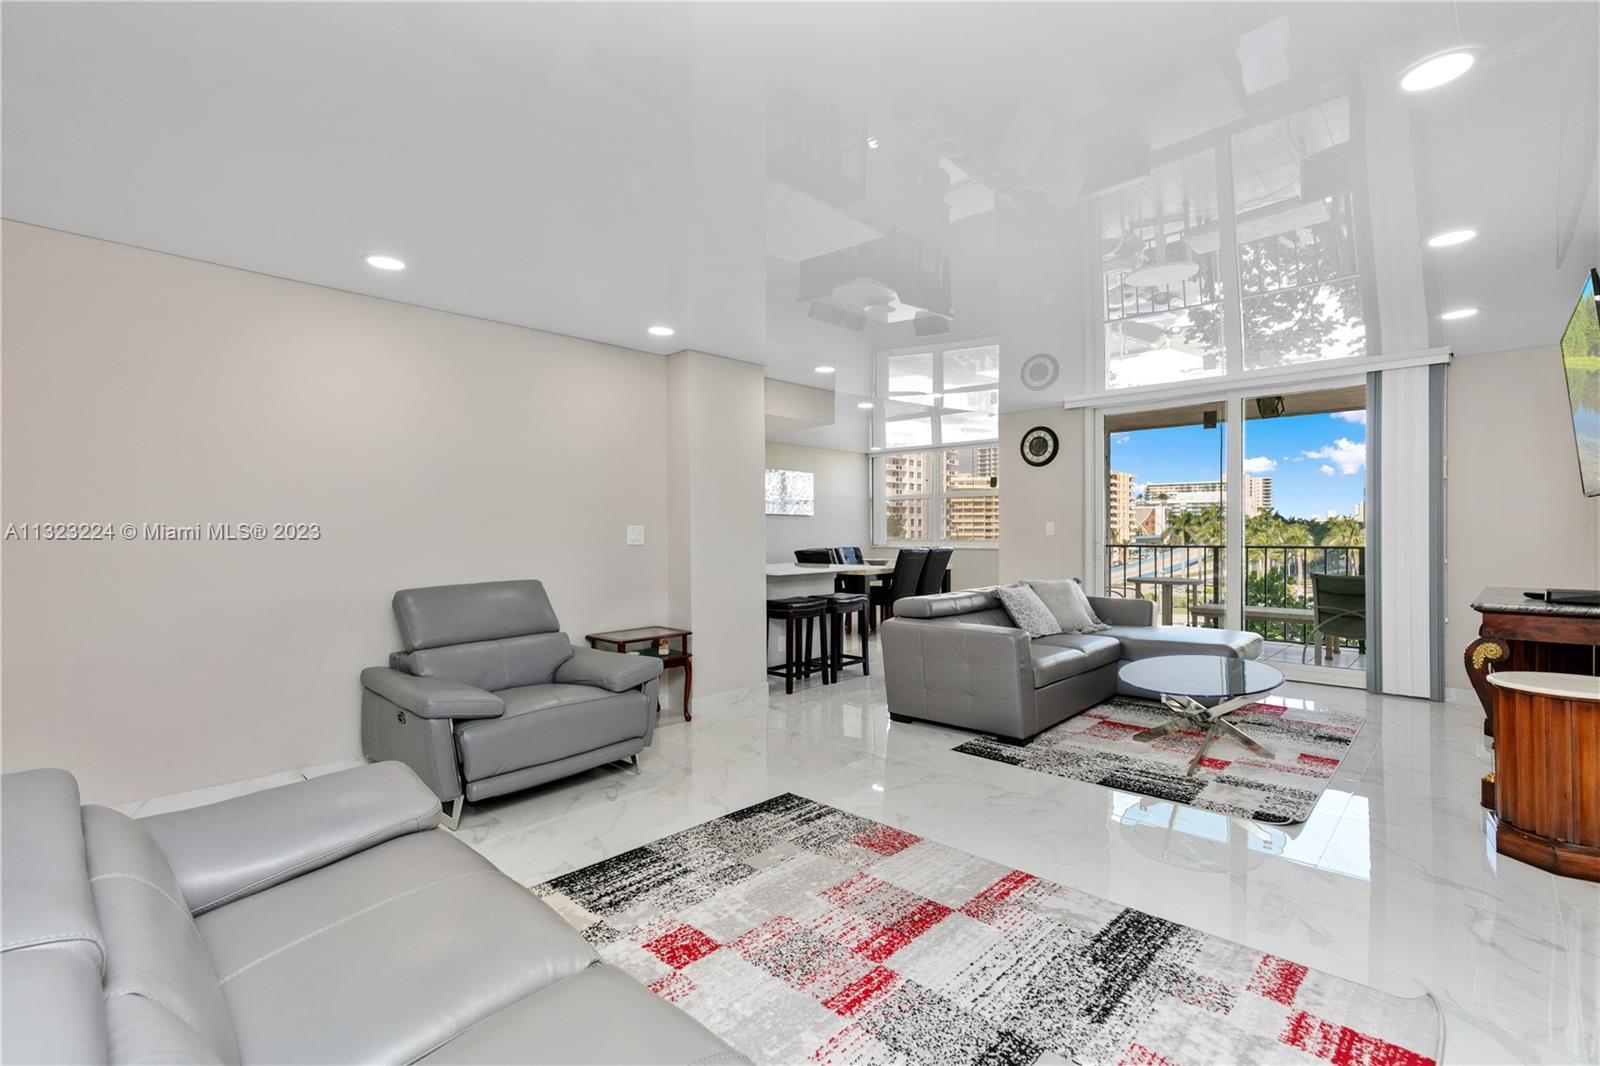 This stunning 2 bd/ 2 ba condo is located in an oceanfront complex in Hallandale. The spacious floor